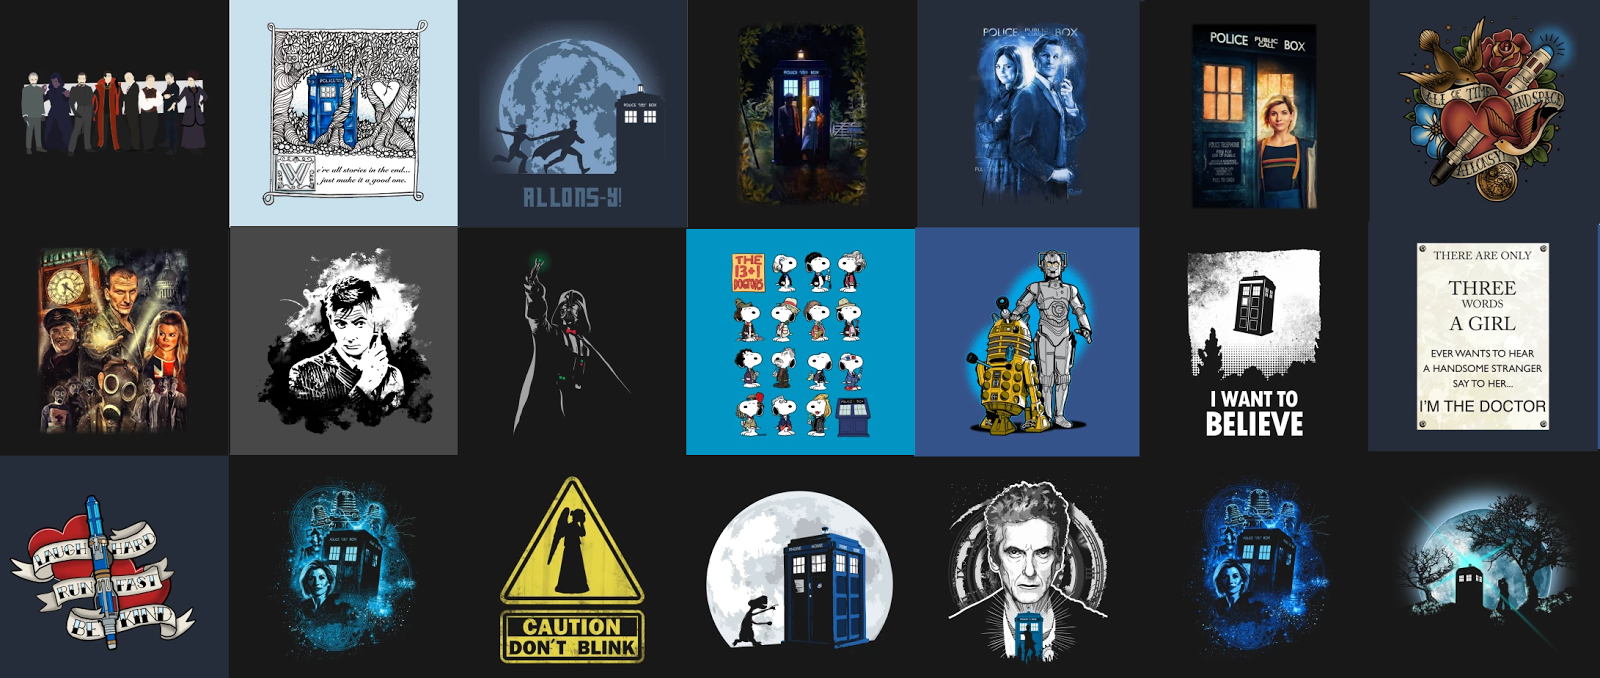 New This Week S Doctor Who Merch Collection - gl meadows roblox